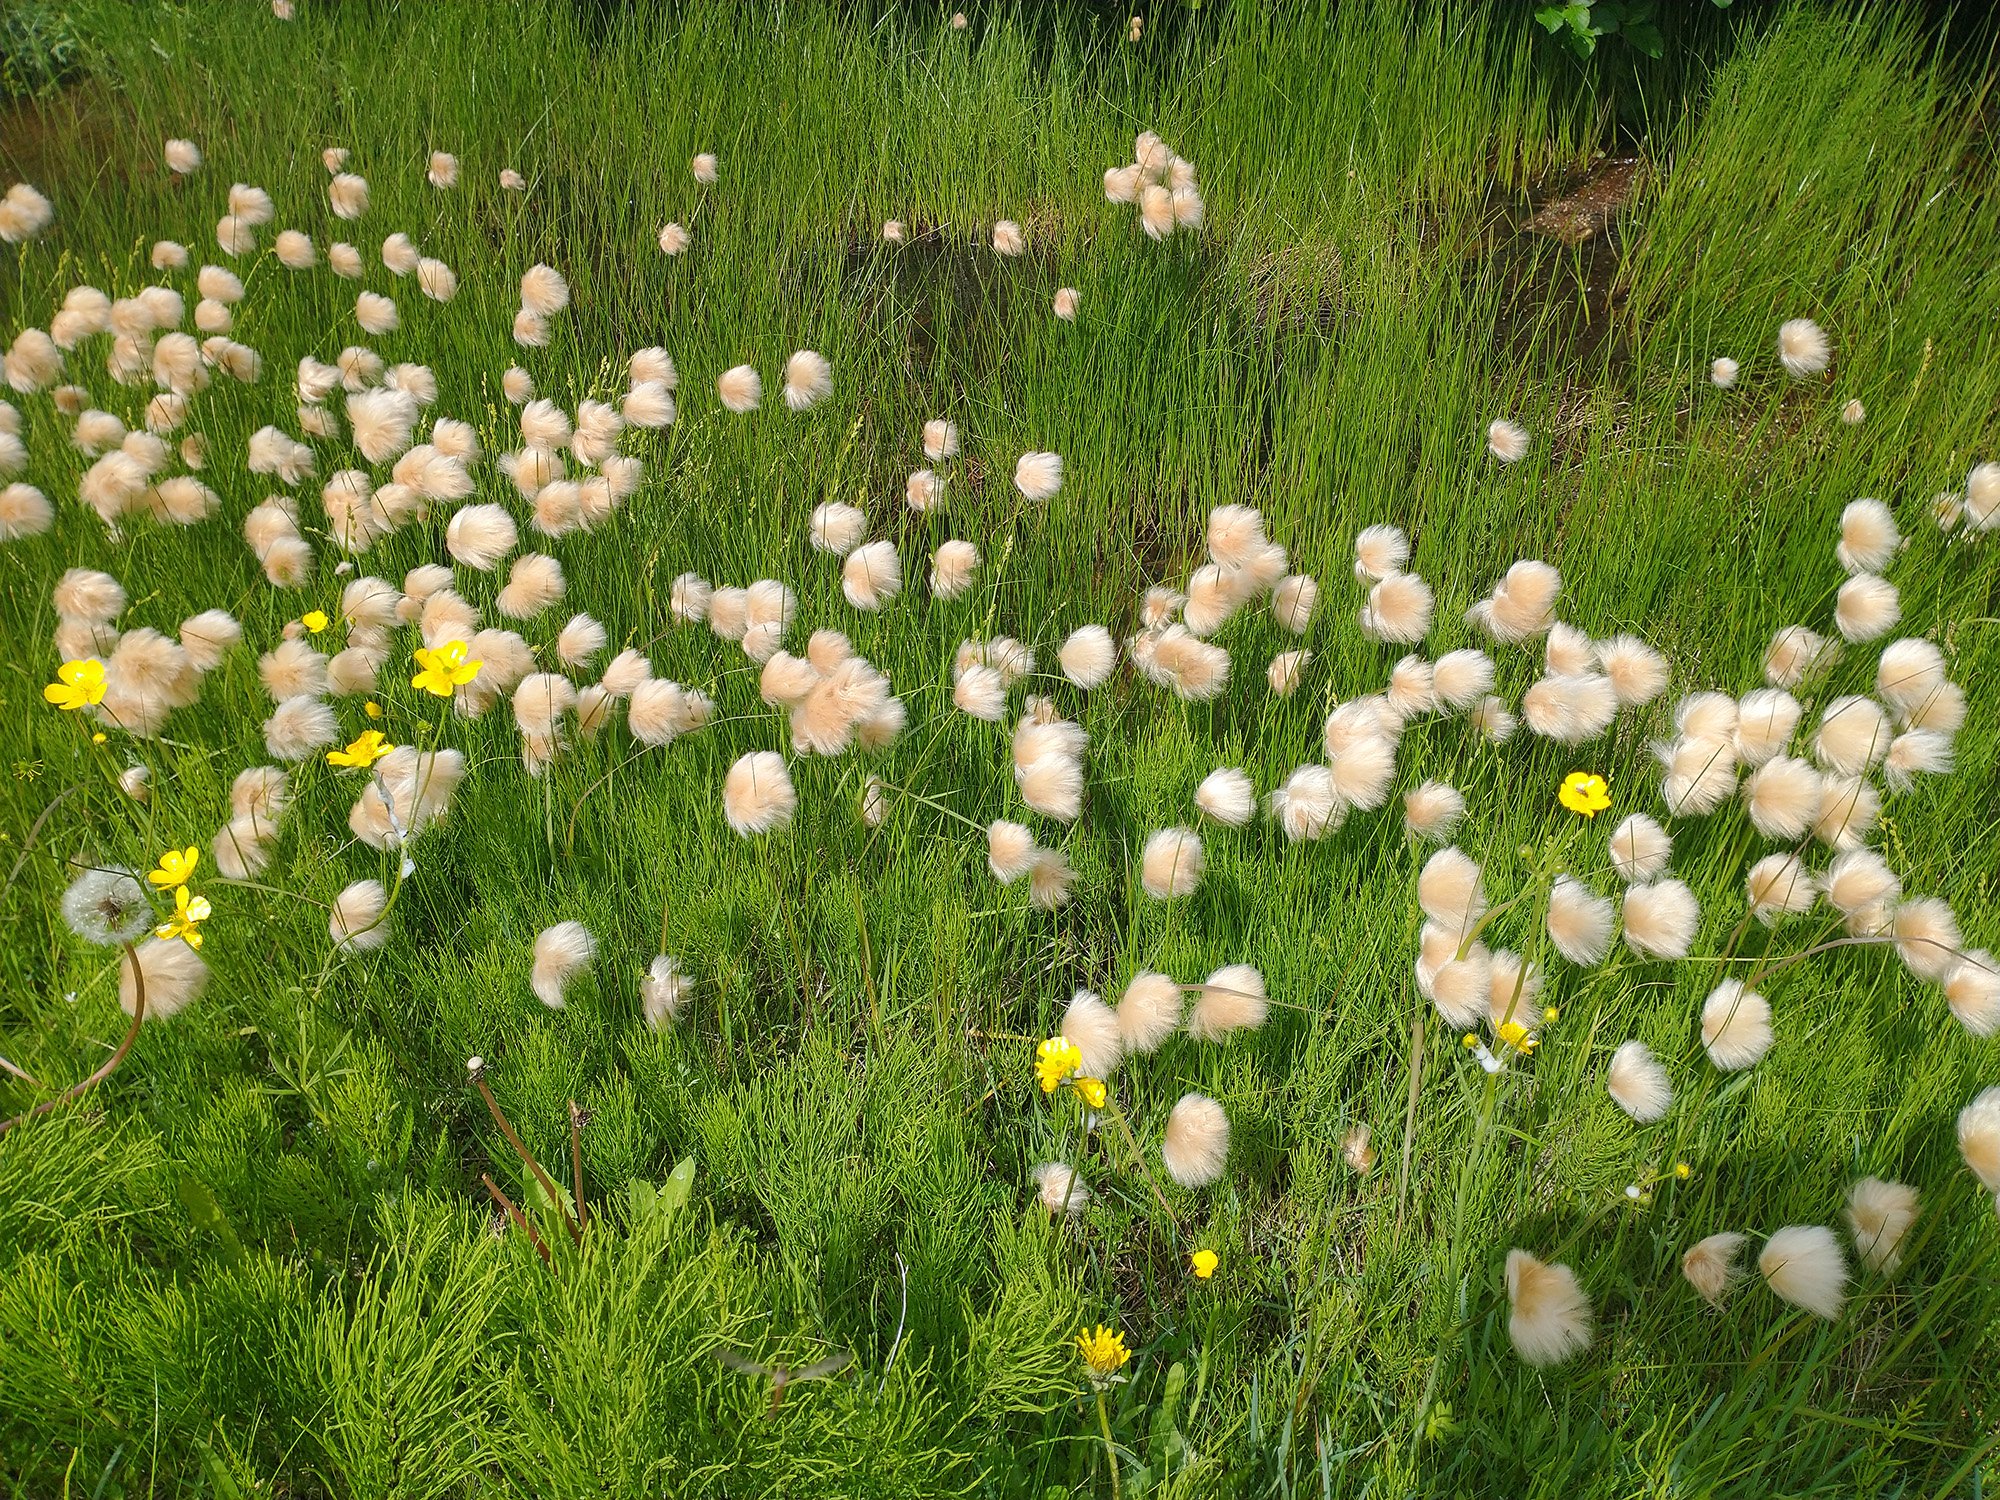 Look at these puffballs. What is that?